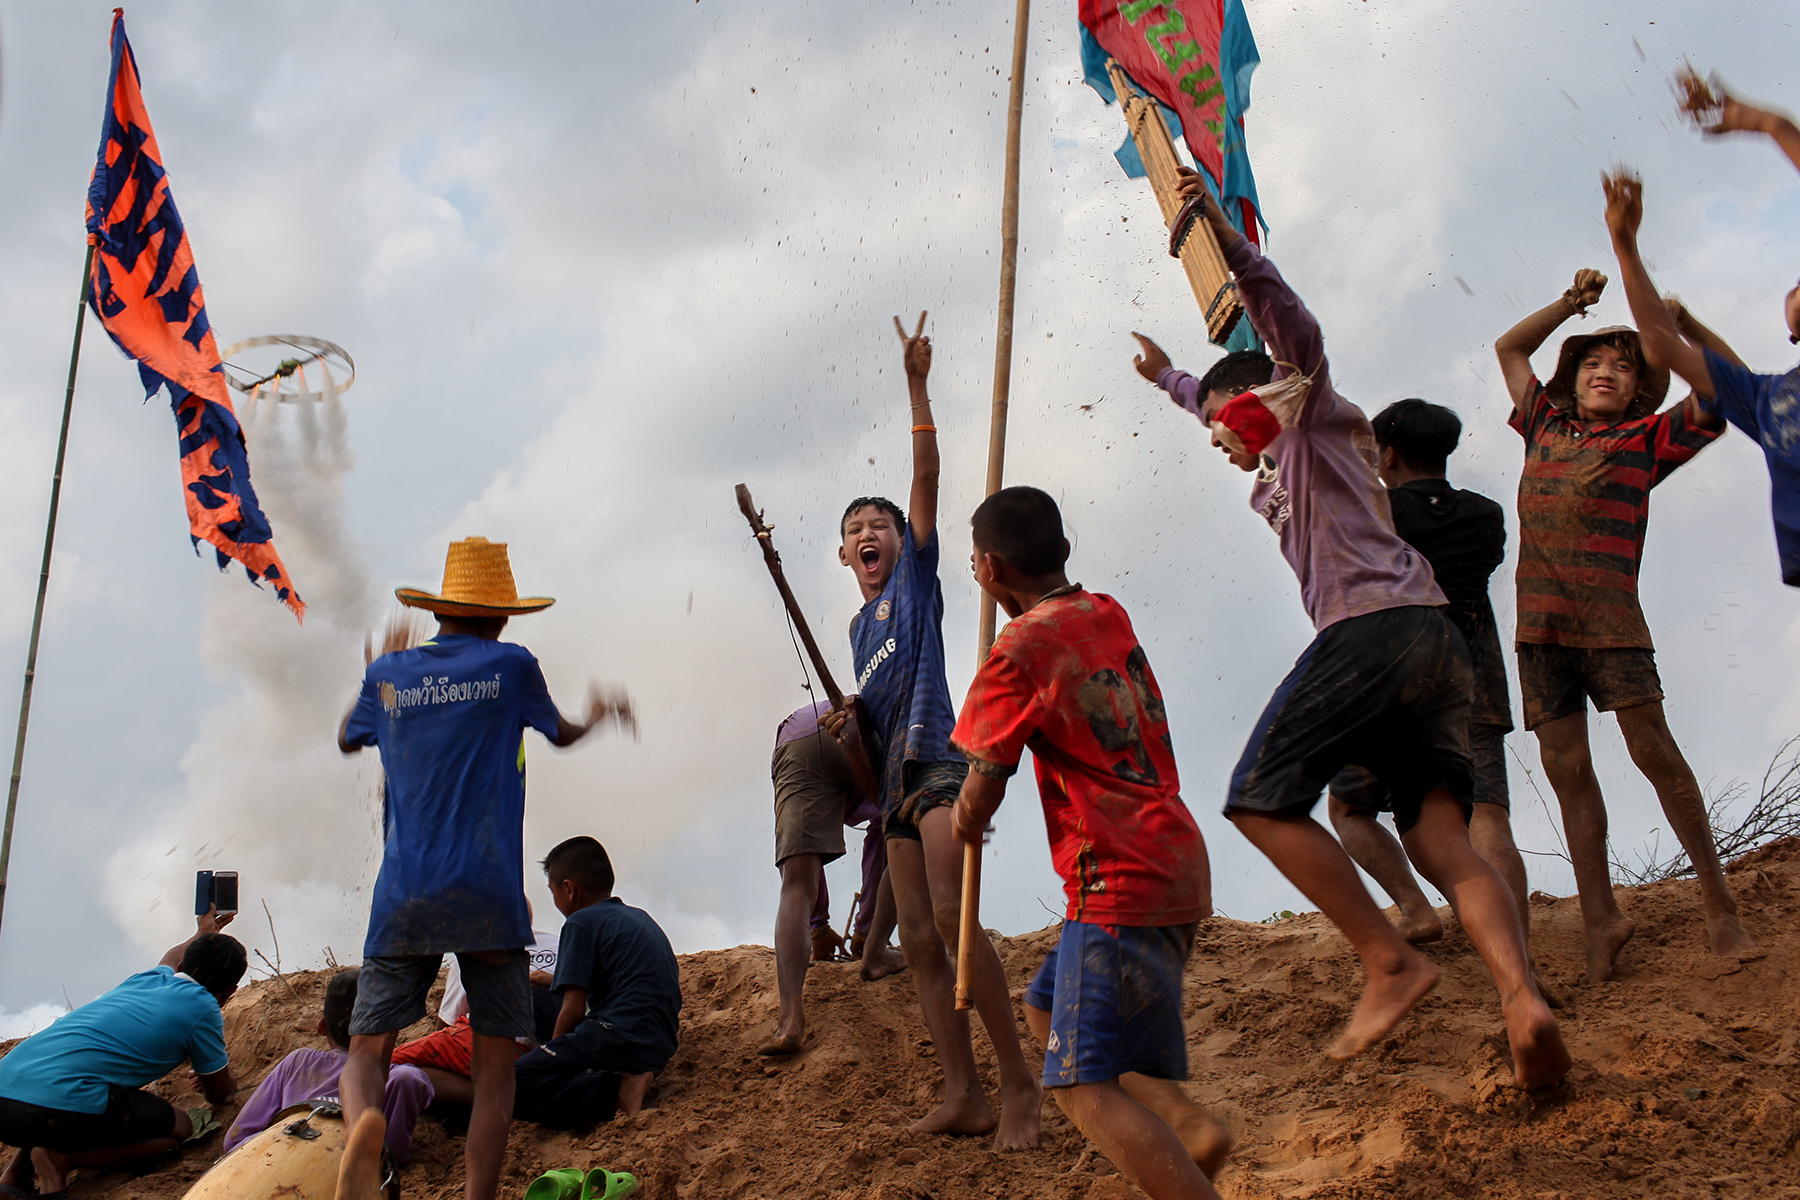 Young people jumping excitedly around a homemade rocket on a sand dune during the Bun Bang Fai Rocket Festival  in Thailand